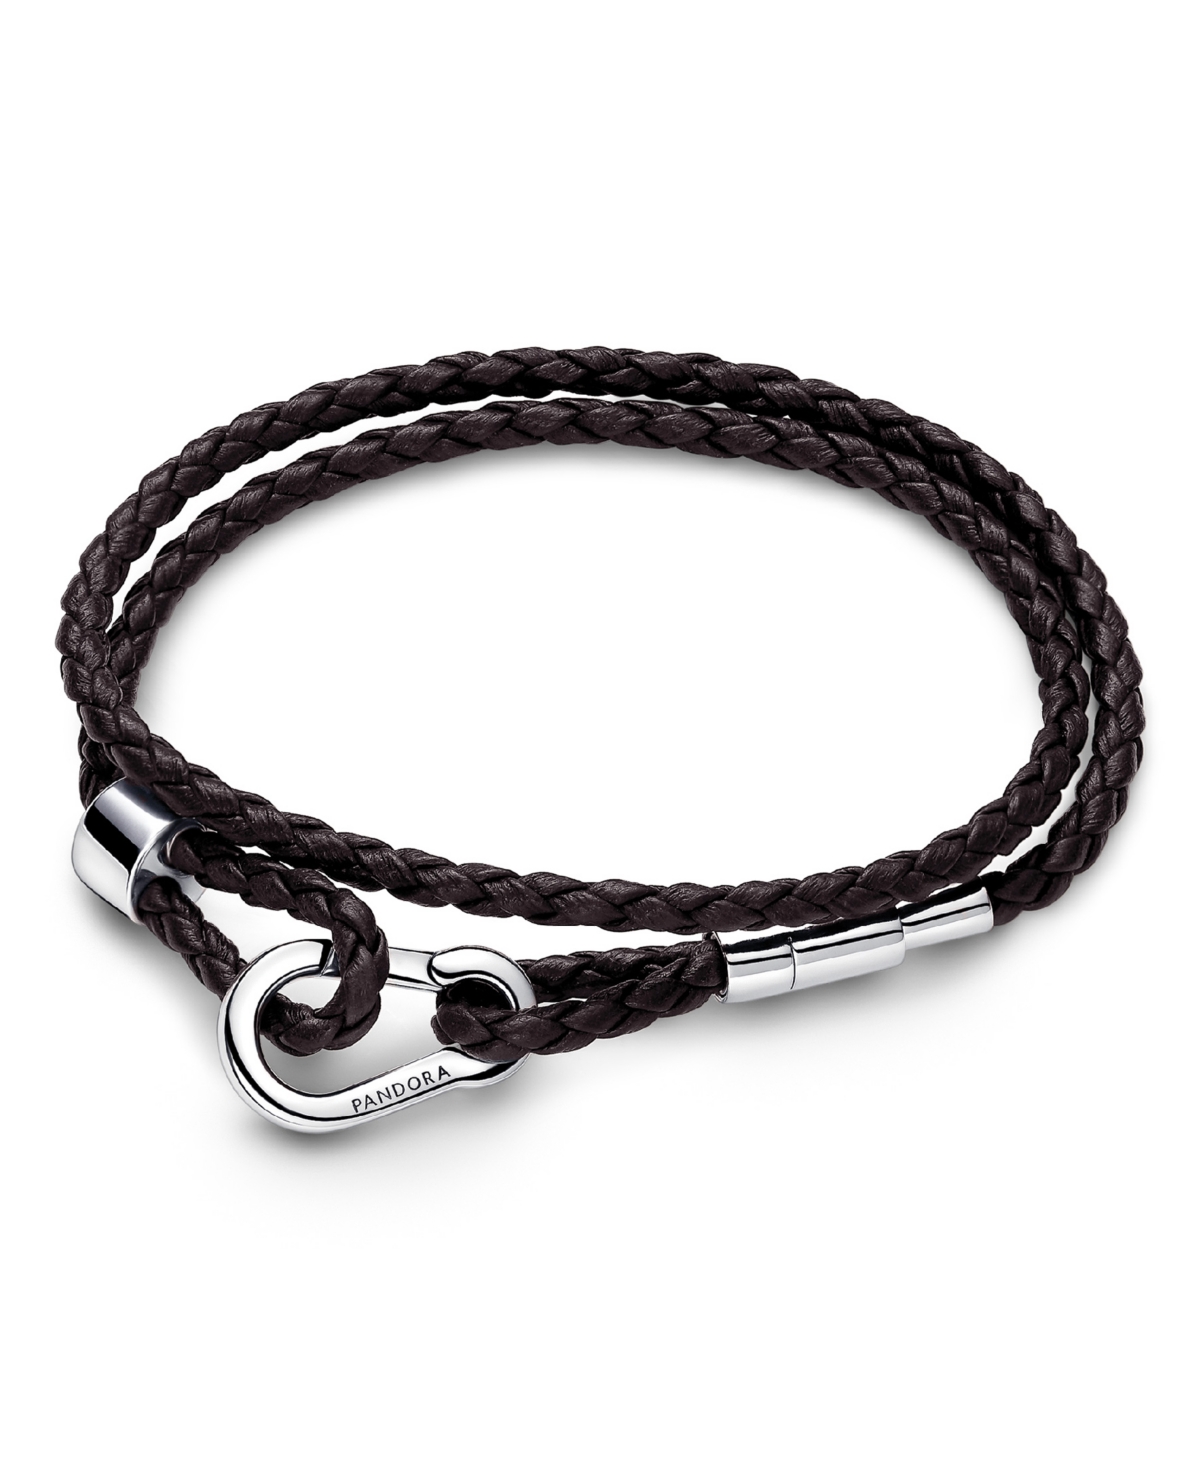 Brown Braided Double Leather Bracelet - Brown